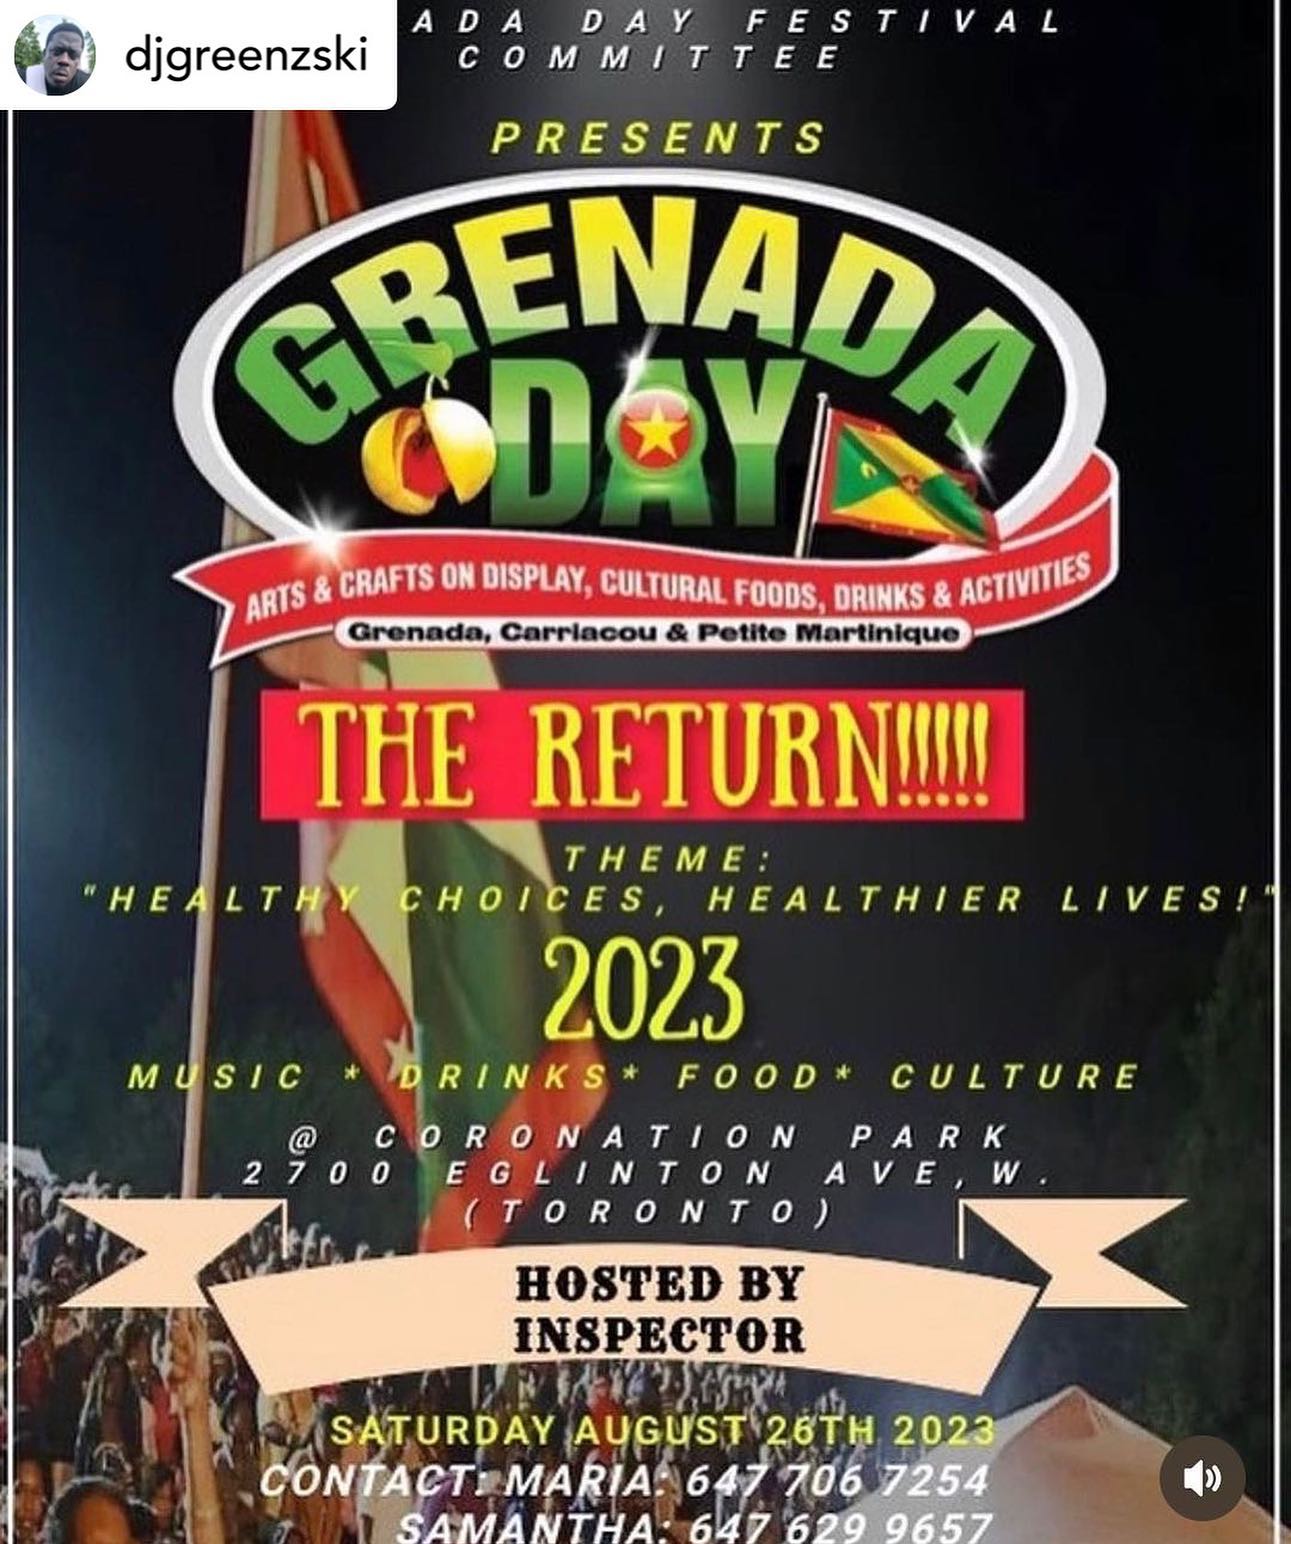 SATURDAY AUGUST 26TH 

GRENADA DAY @ CORONATION PARK 2700 EGLINTON AVE WEST .

AFTER PARTY @ JAC 995 ARROW RD 
ADM :$10 B4 12